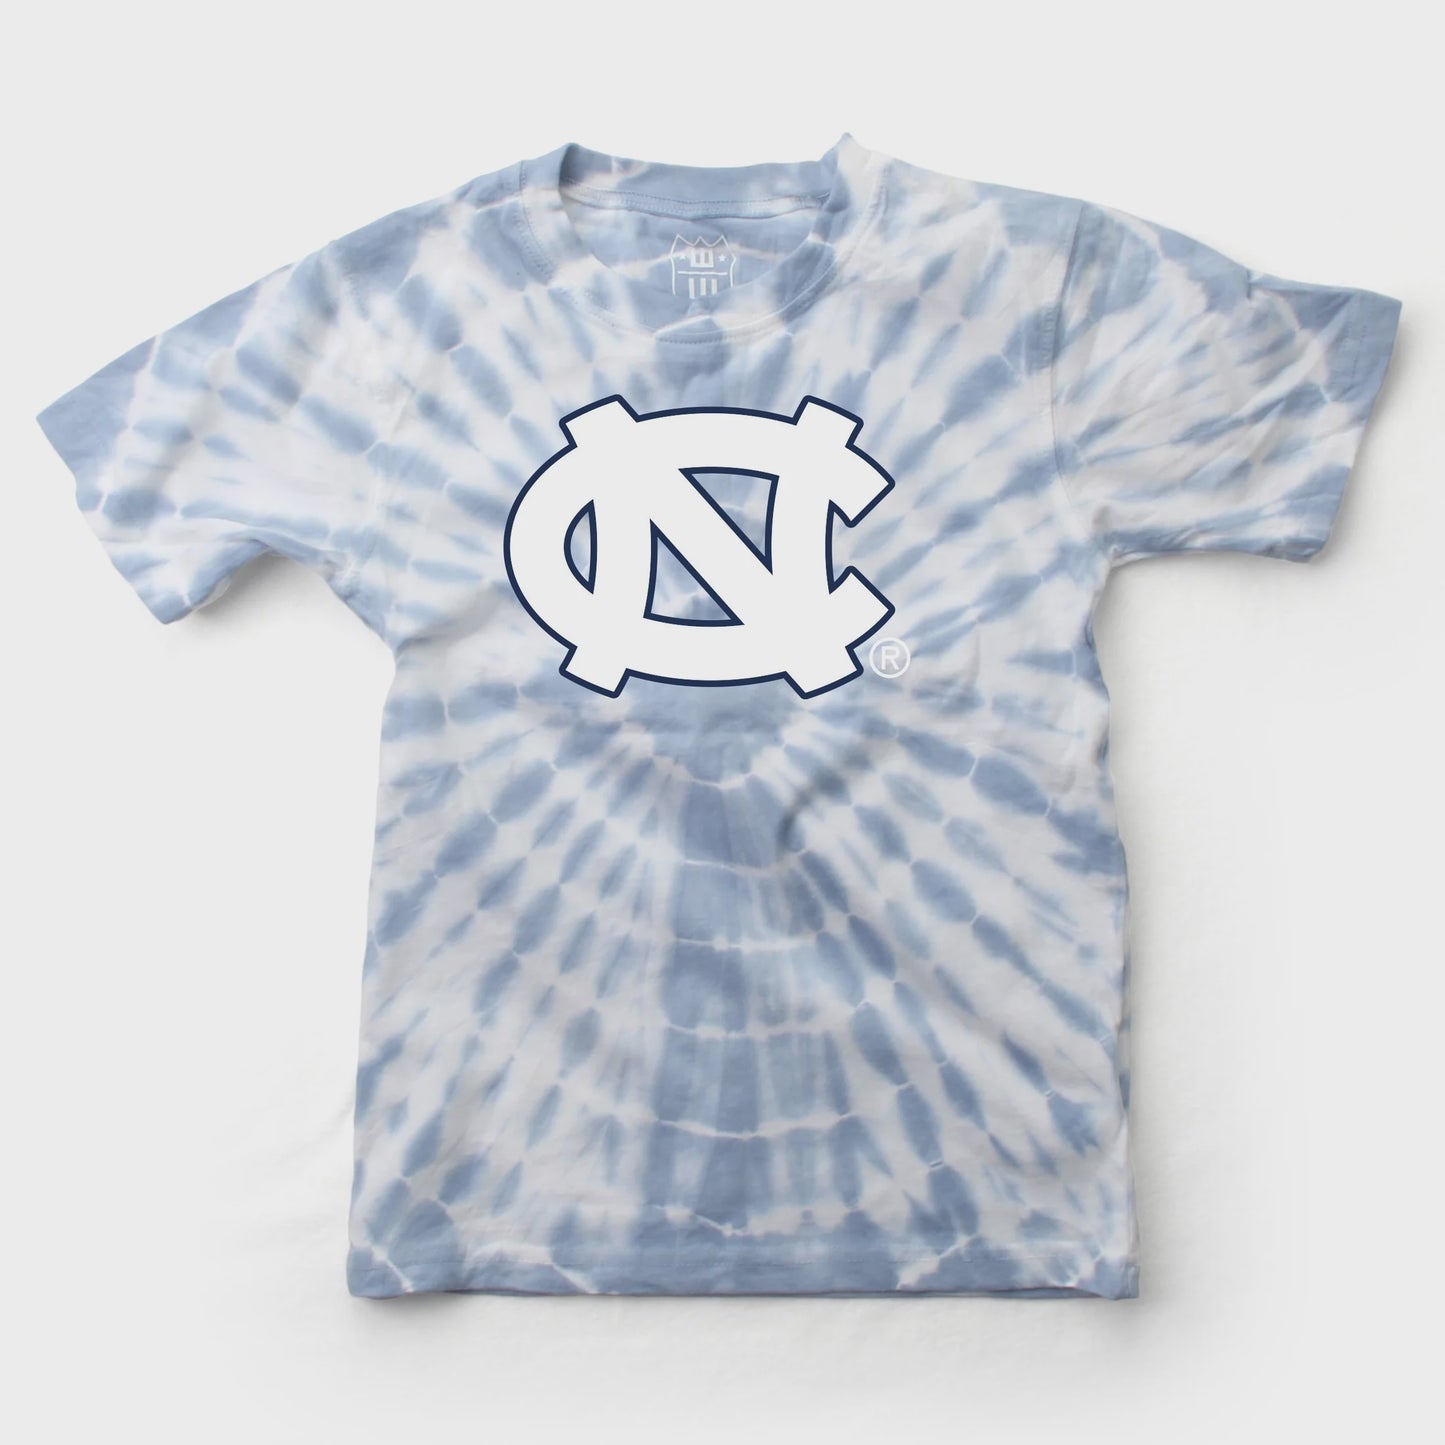 UNC Baby Tie Dye T-Shirt by Wes and Willy